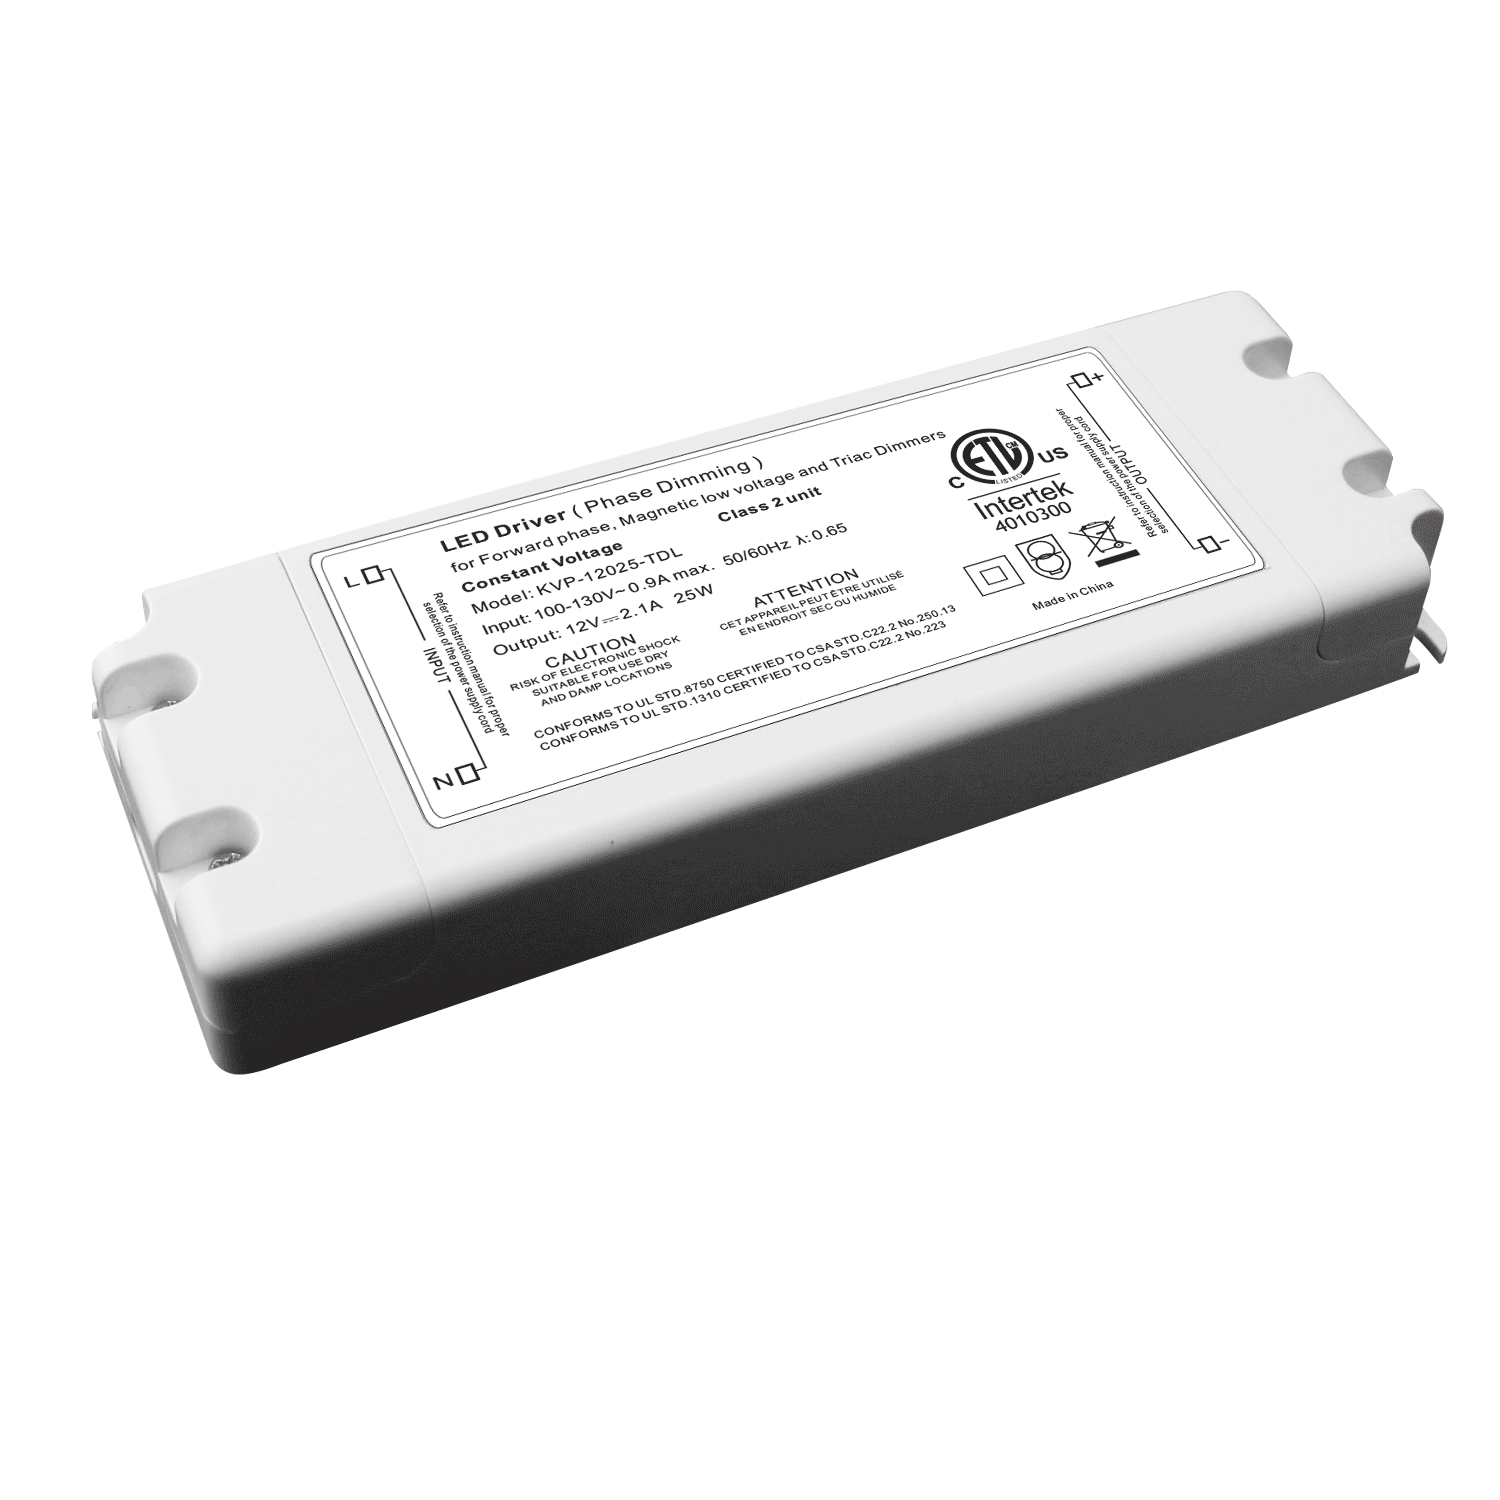 Westgate PL12-HWDR-25W-D 25W Hardwire or Plug-in Driver For Puck/Strip Light